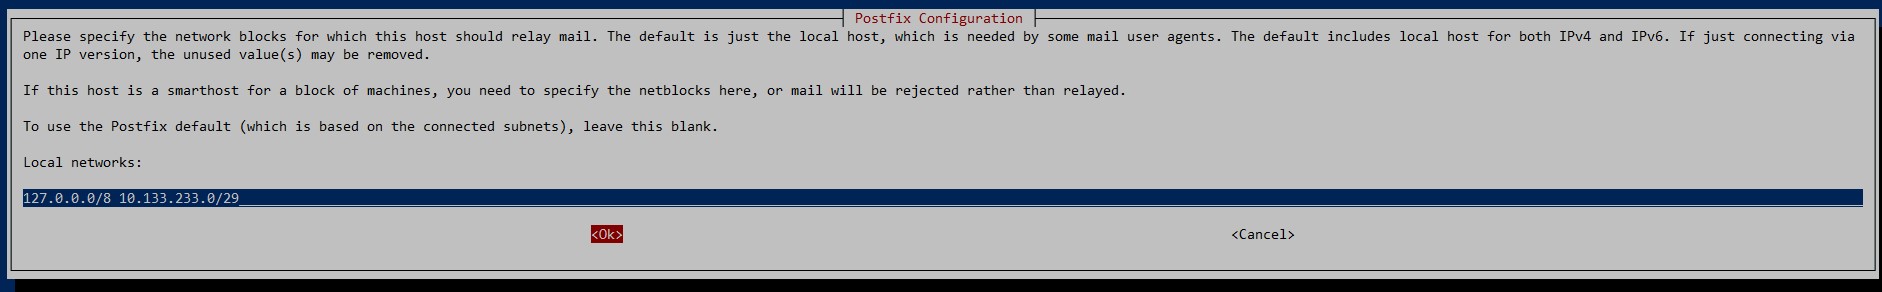 postfix configuration local networks completed